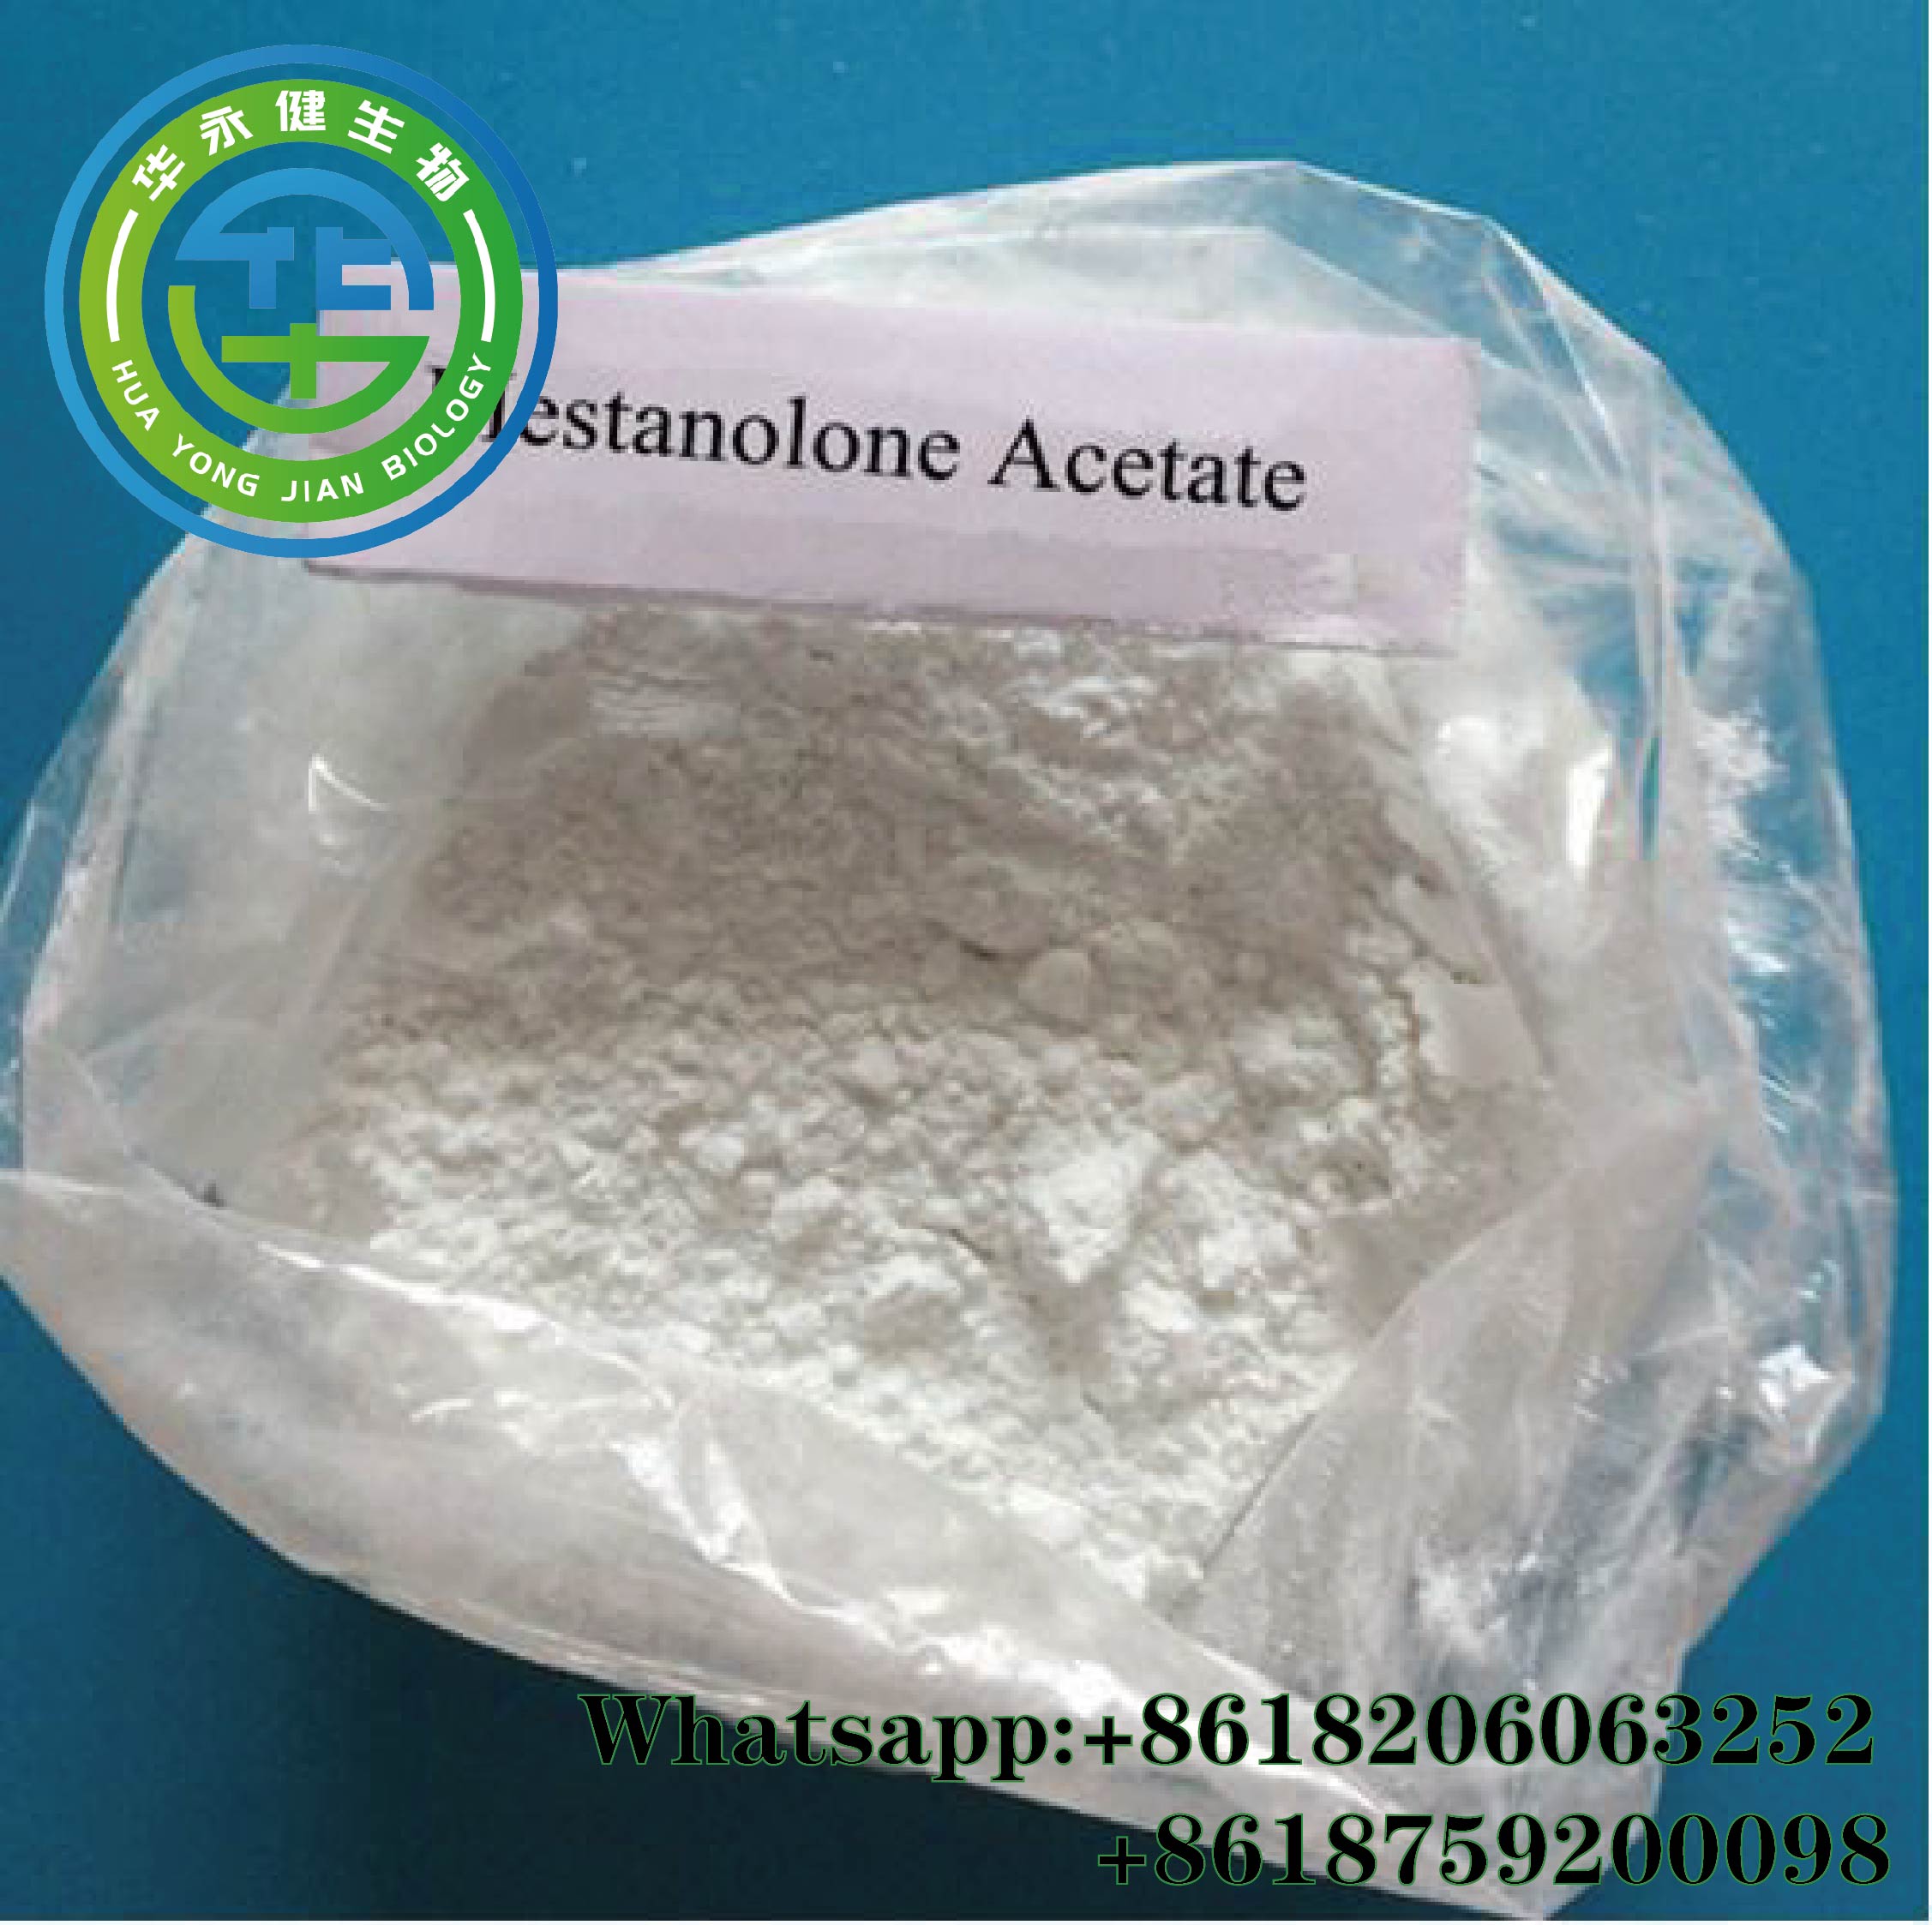 Primobolan A Steroid Hormones Powder Methenolone Acetate Powder CAS 434-05-9 For Muscle Growth 